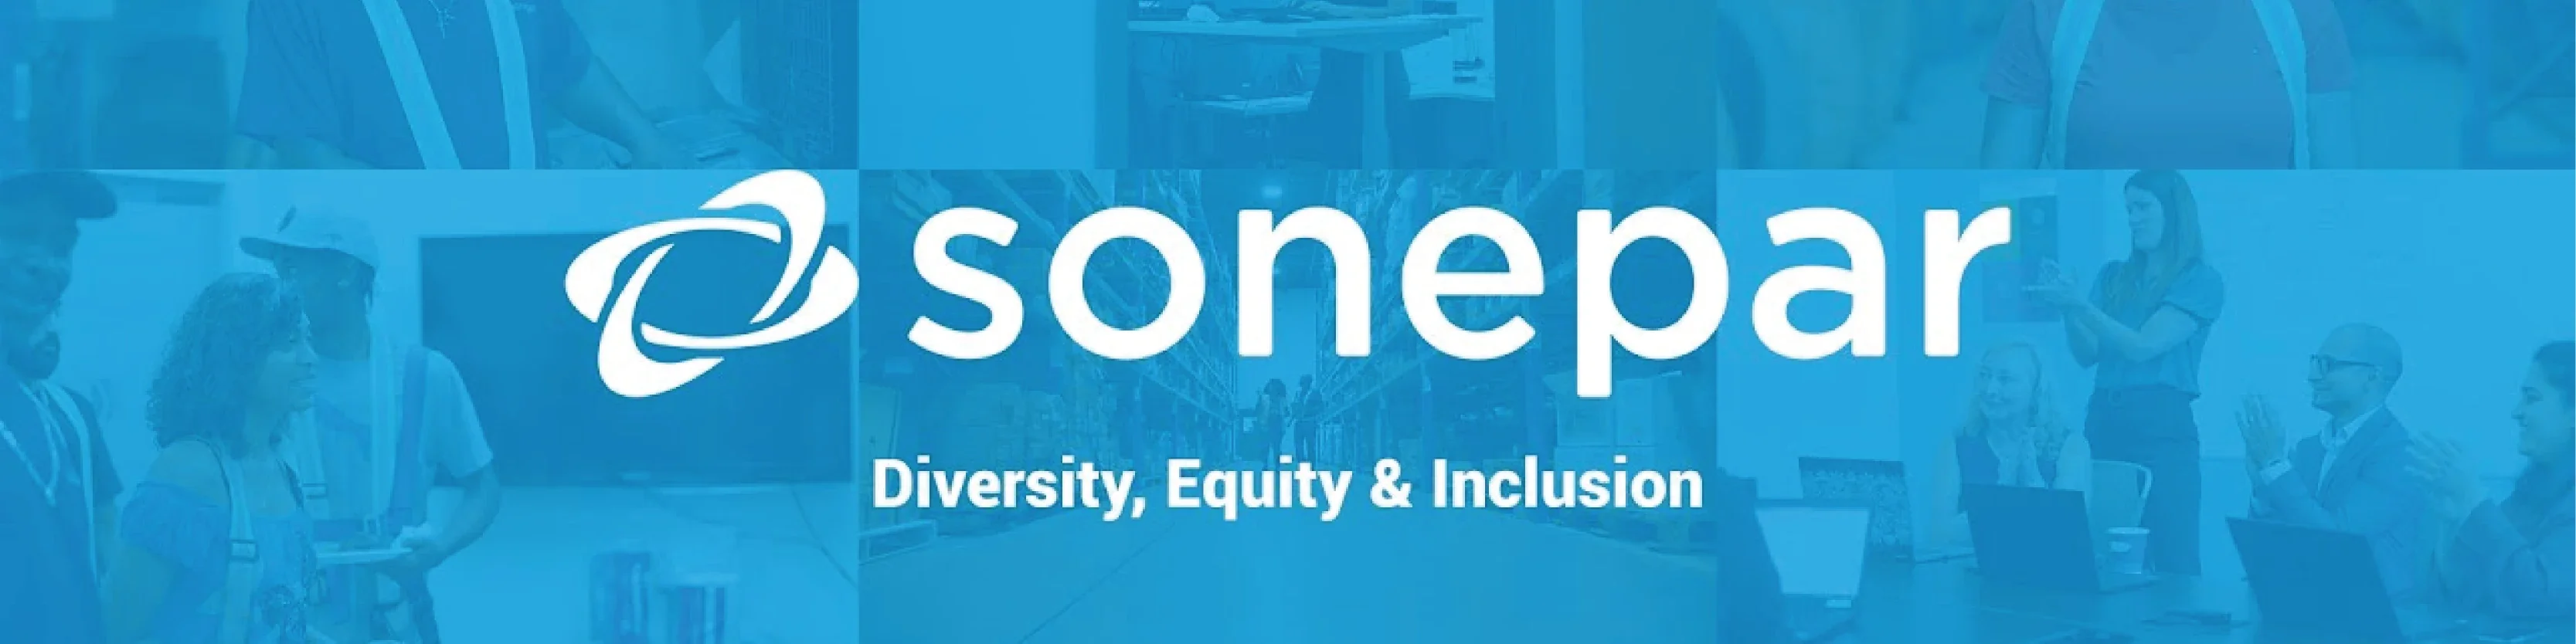 Texcan - News - Company News - Diversity, Equity & Inclusion at Sonepar in Canada - Banner Image